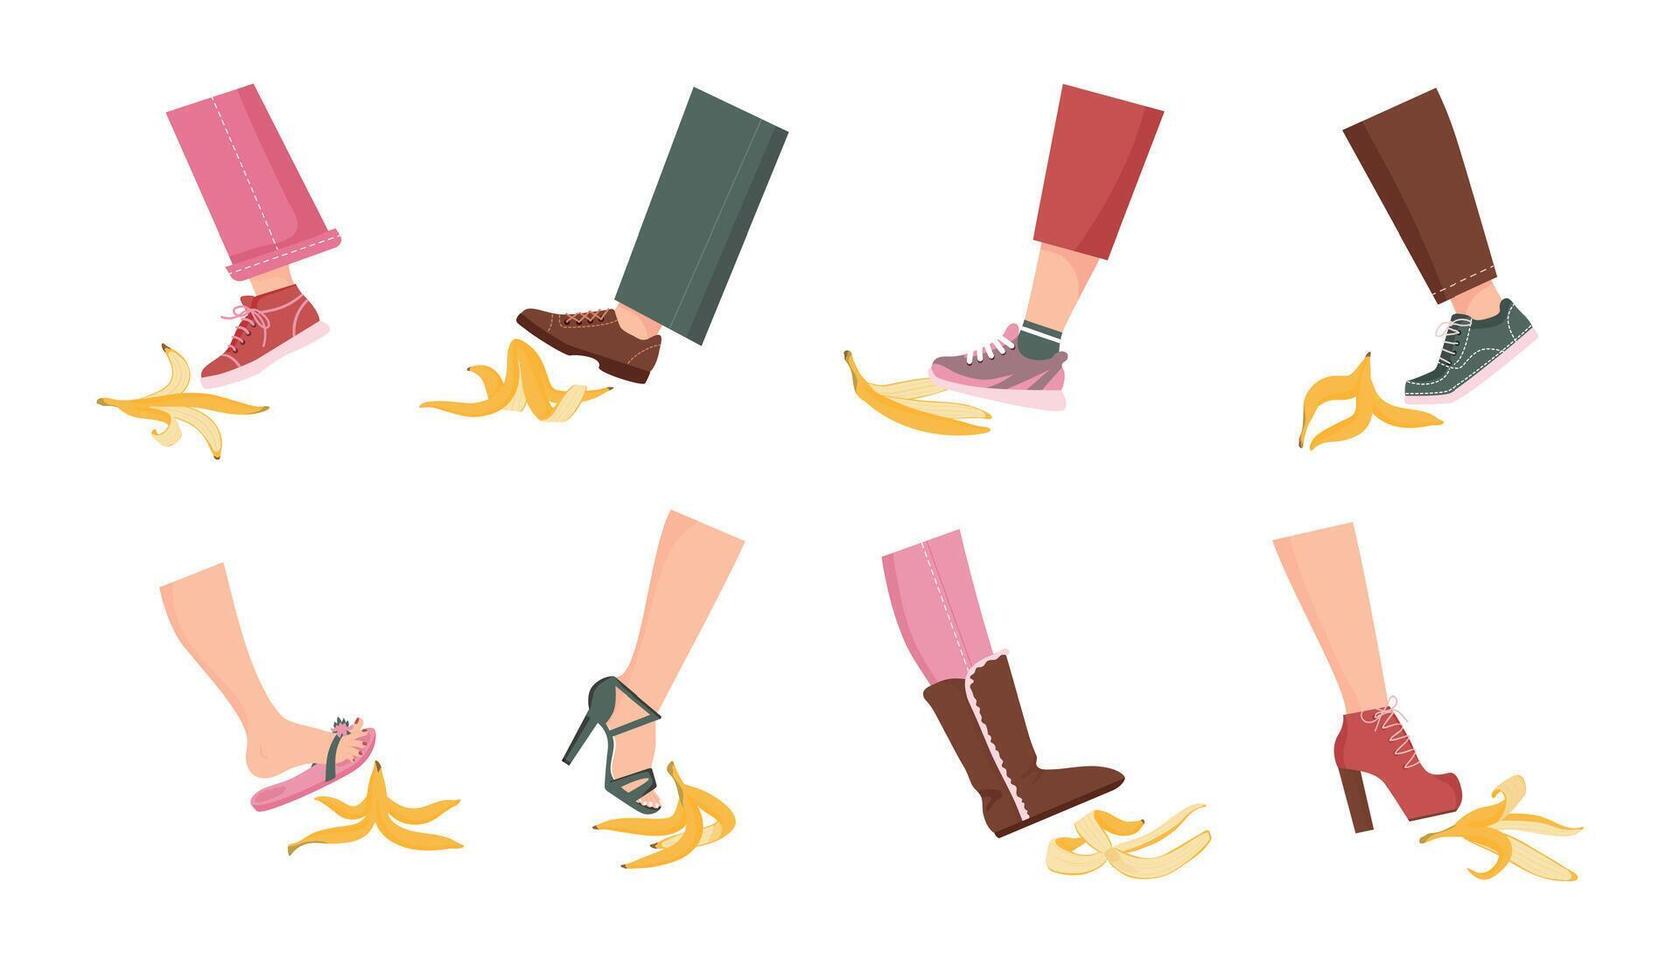 Slip on banana peel. Cartoon comic accident, man and woman persons foot stepping and slipping on banana skin. Vector risk and failure concept set